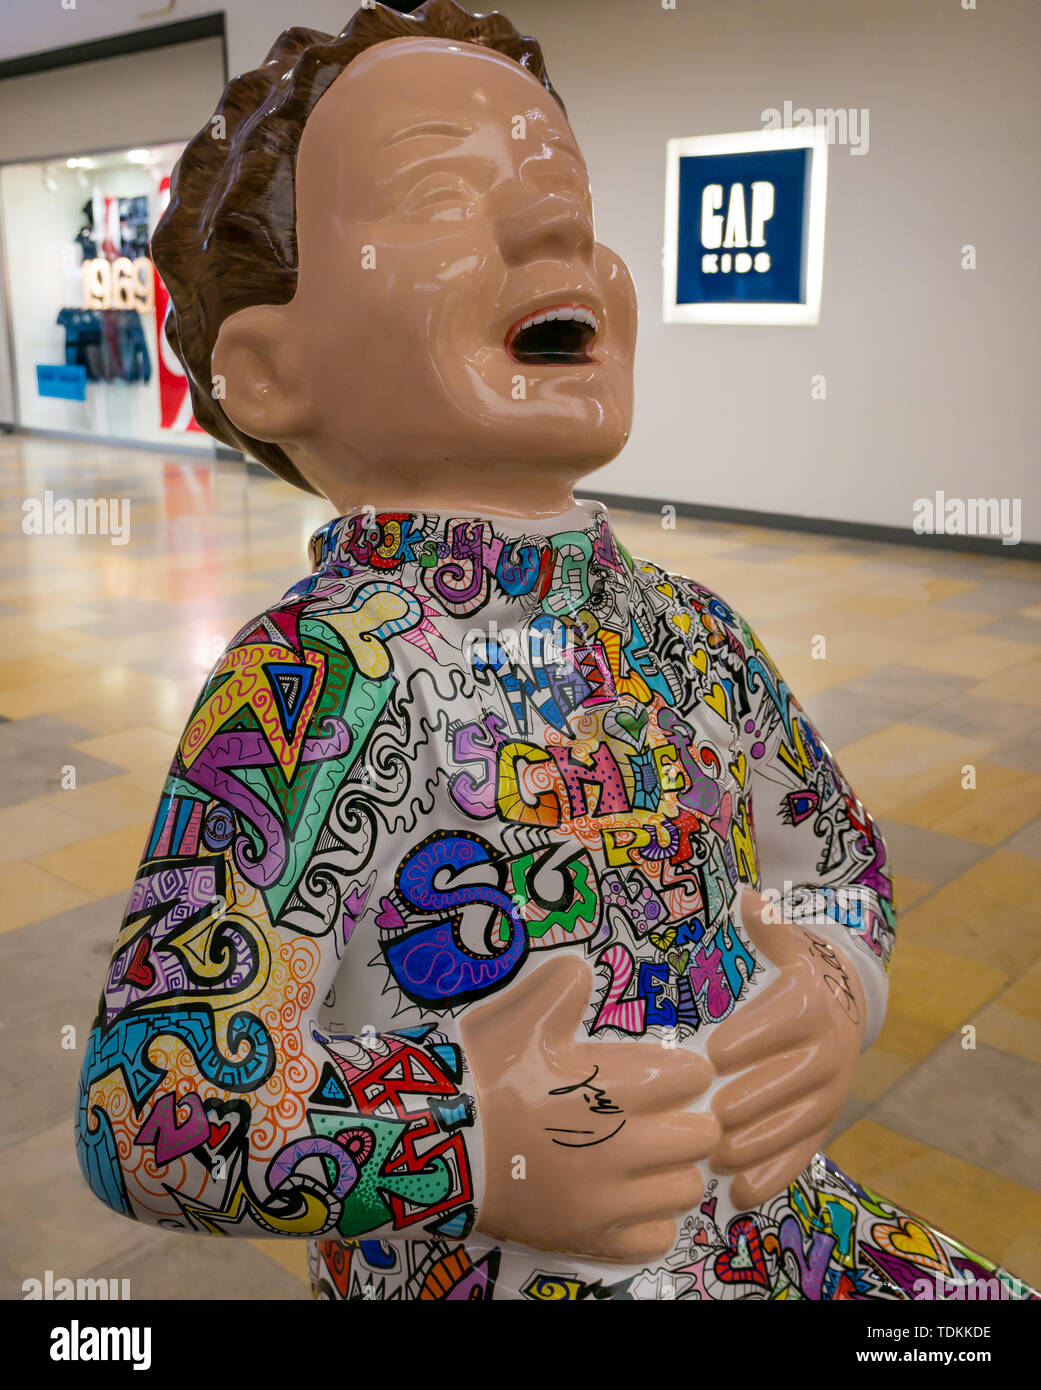 Leith, Edinburgh, Scotland, United Kingdom, 17 June 2019. Oor Wullie's Big Bucket Trail: An art trail of 200 Oor Wullie sculptures appear in Scottish cities in a mass arts event that lasts until August 30th. Oor Wullie is an iconic Scottish cartoon character. The sculptures will be auctioned to raise money for charities. There are 5 in the Leith area, and 60 in Edinburgh altogether. The Proclaimers, Craig Reid, at Ocean Terminal by Vanessa Gibson with the singer's signature Stock Photo